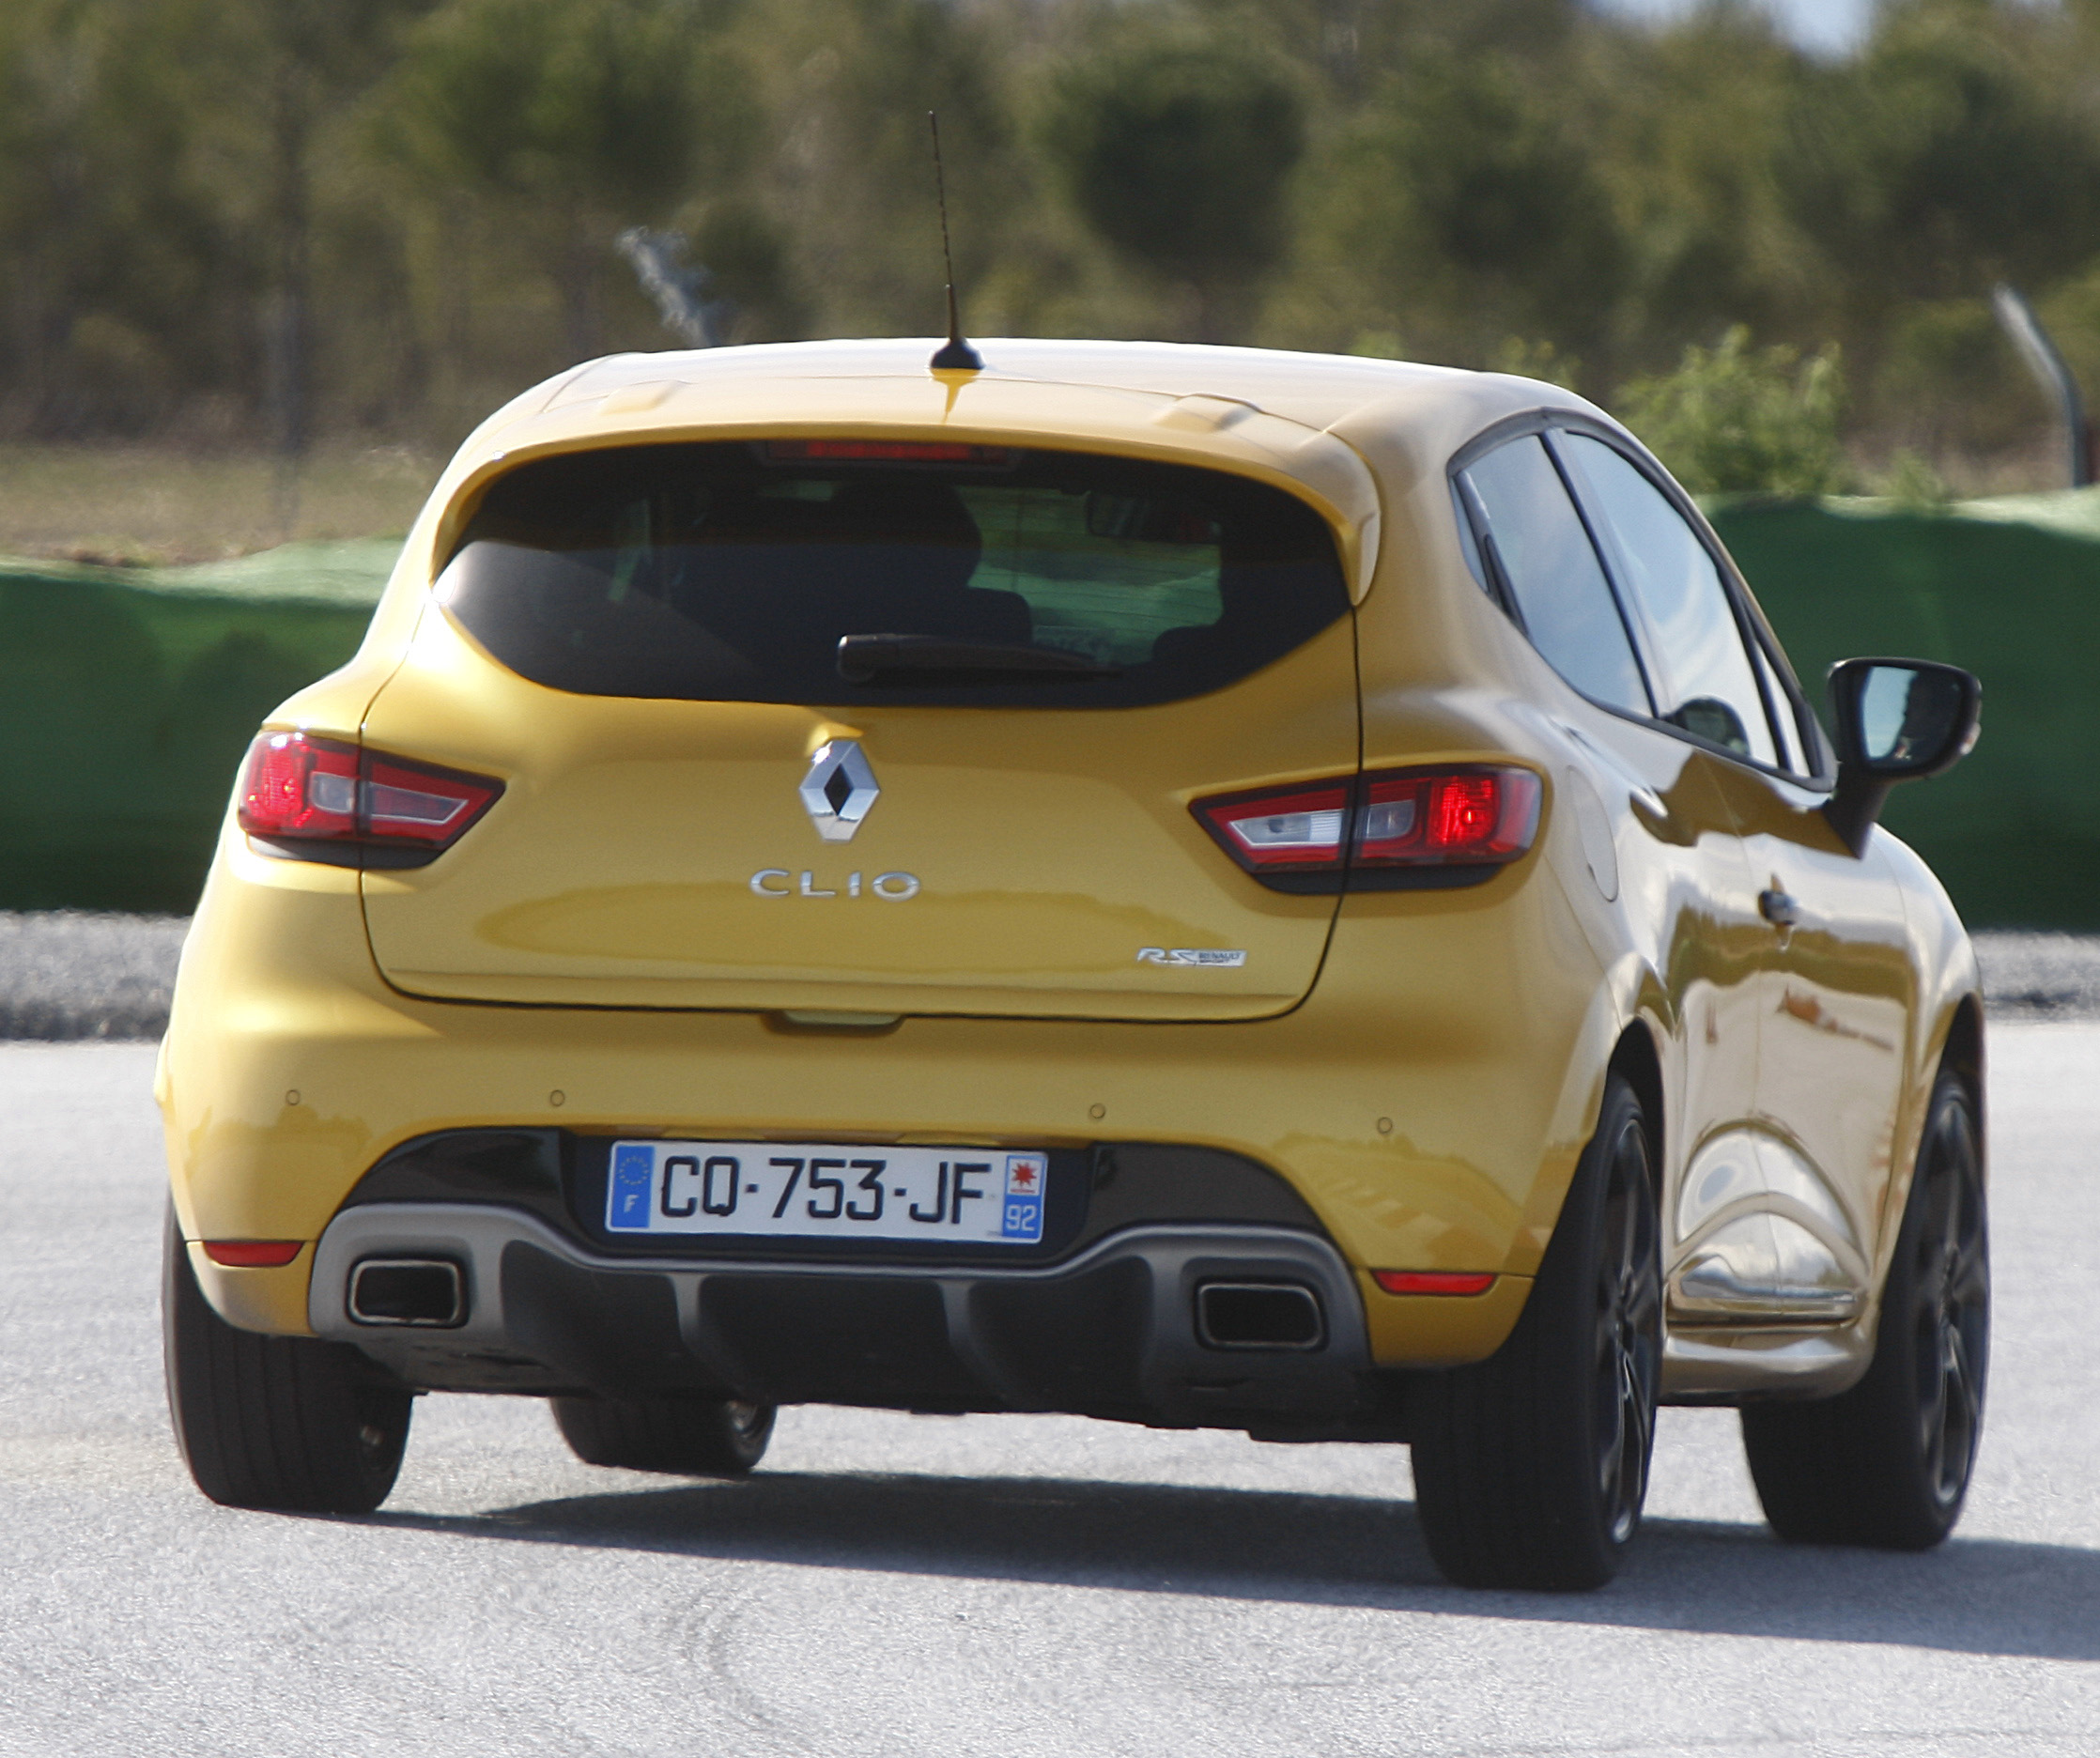 The Renault Clio RS